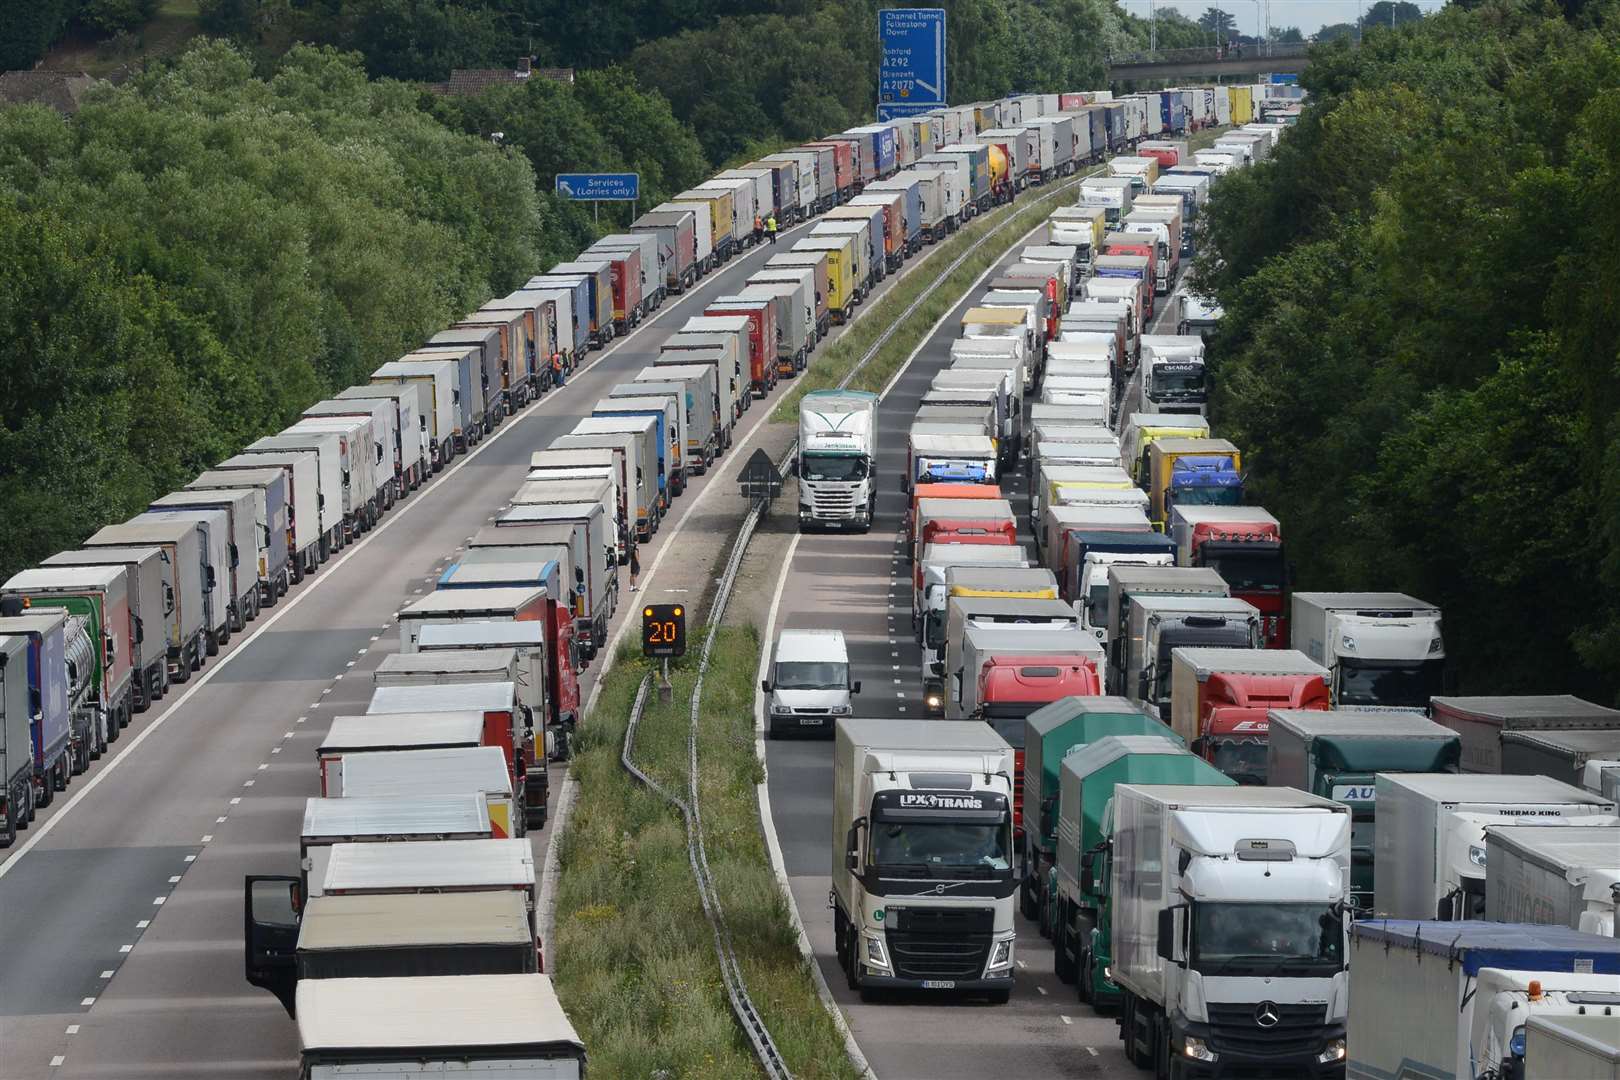 Operation Stack caused chaos on Kent's roads in 2015 and there are fears it could become a regular sight after Brexit